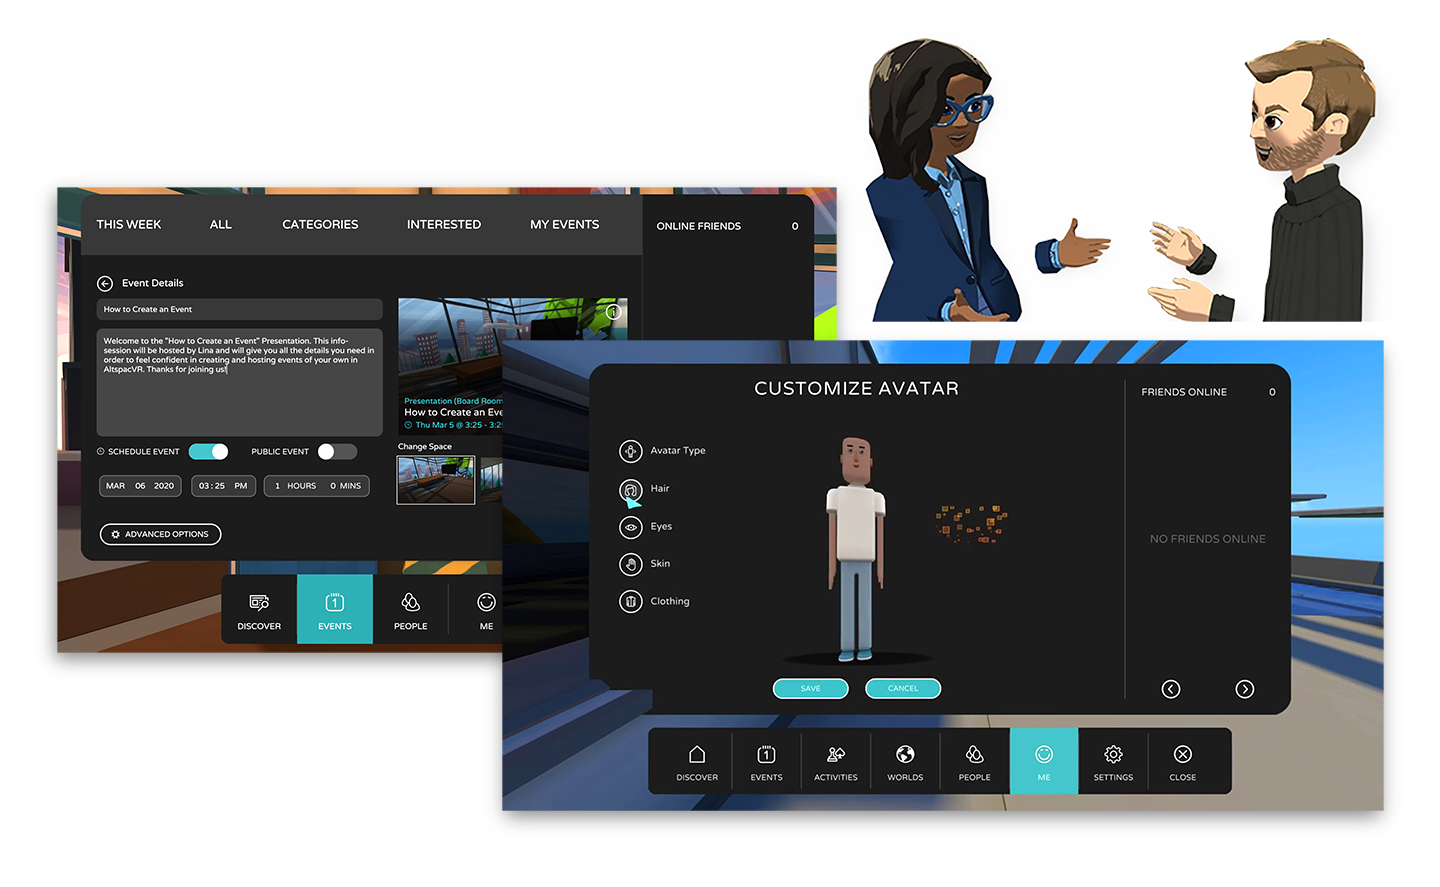 AltspaceVR screenshots for creating custom avatars, as well as two avatar people - a man and a woman - in a conversation, above the screenshots. featured Image